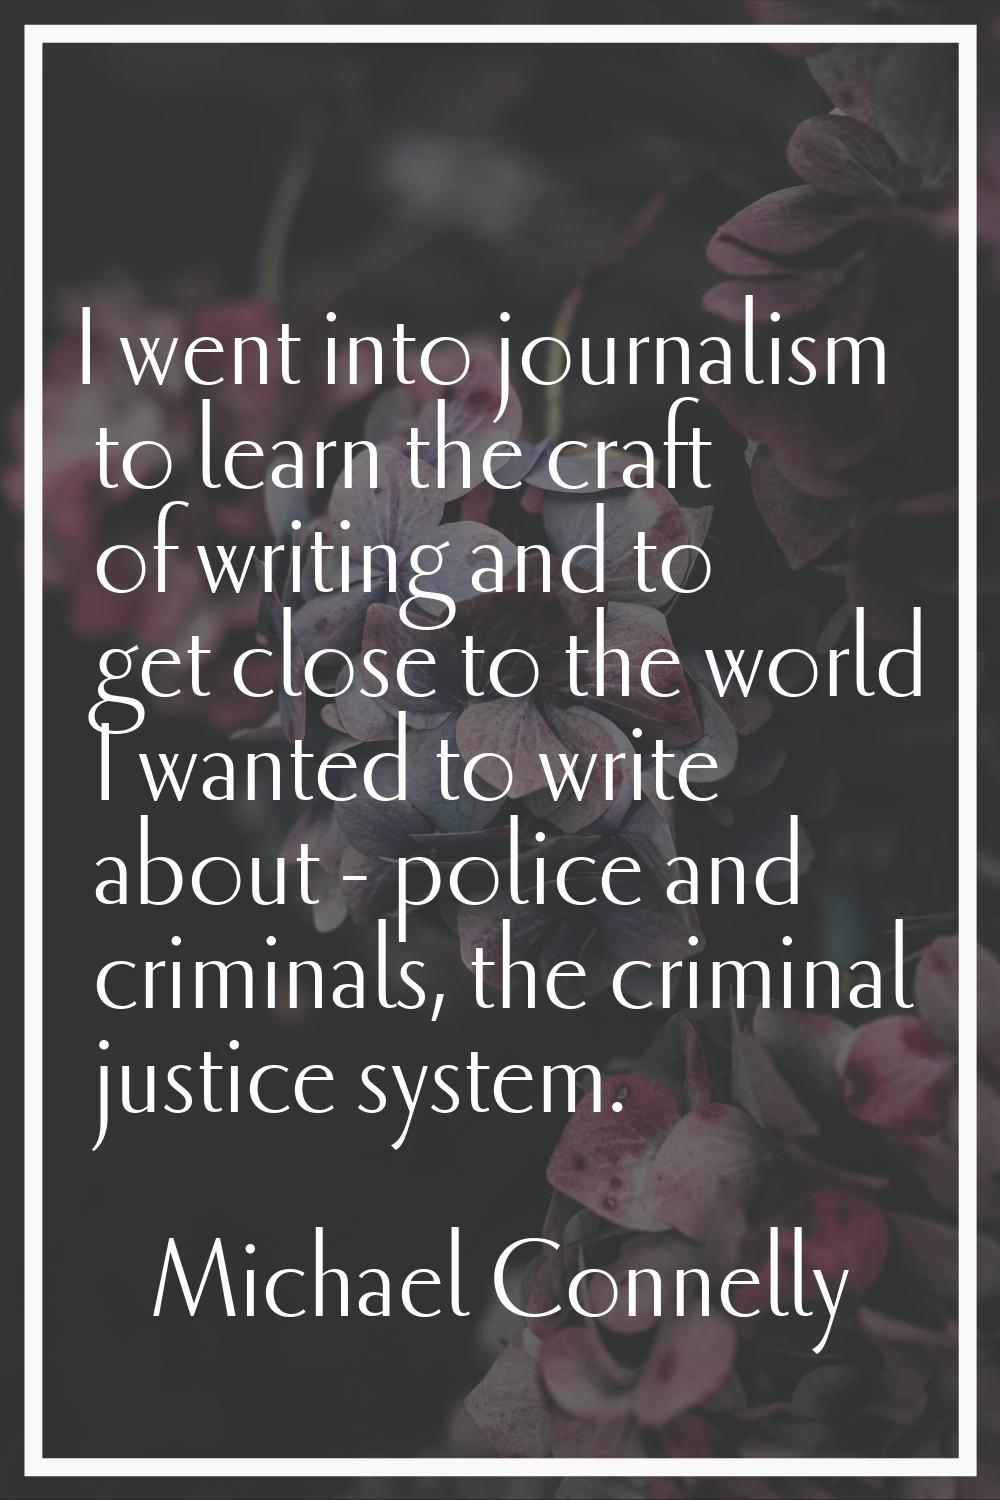 I went into journalism to learn the craft of writing and to get close to the world I wanted to writ